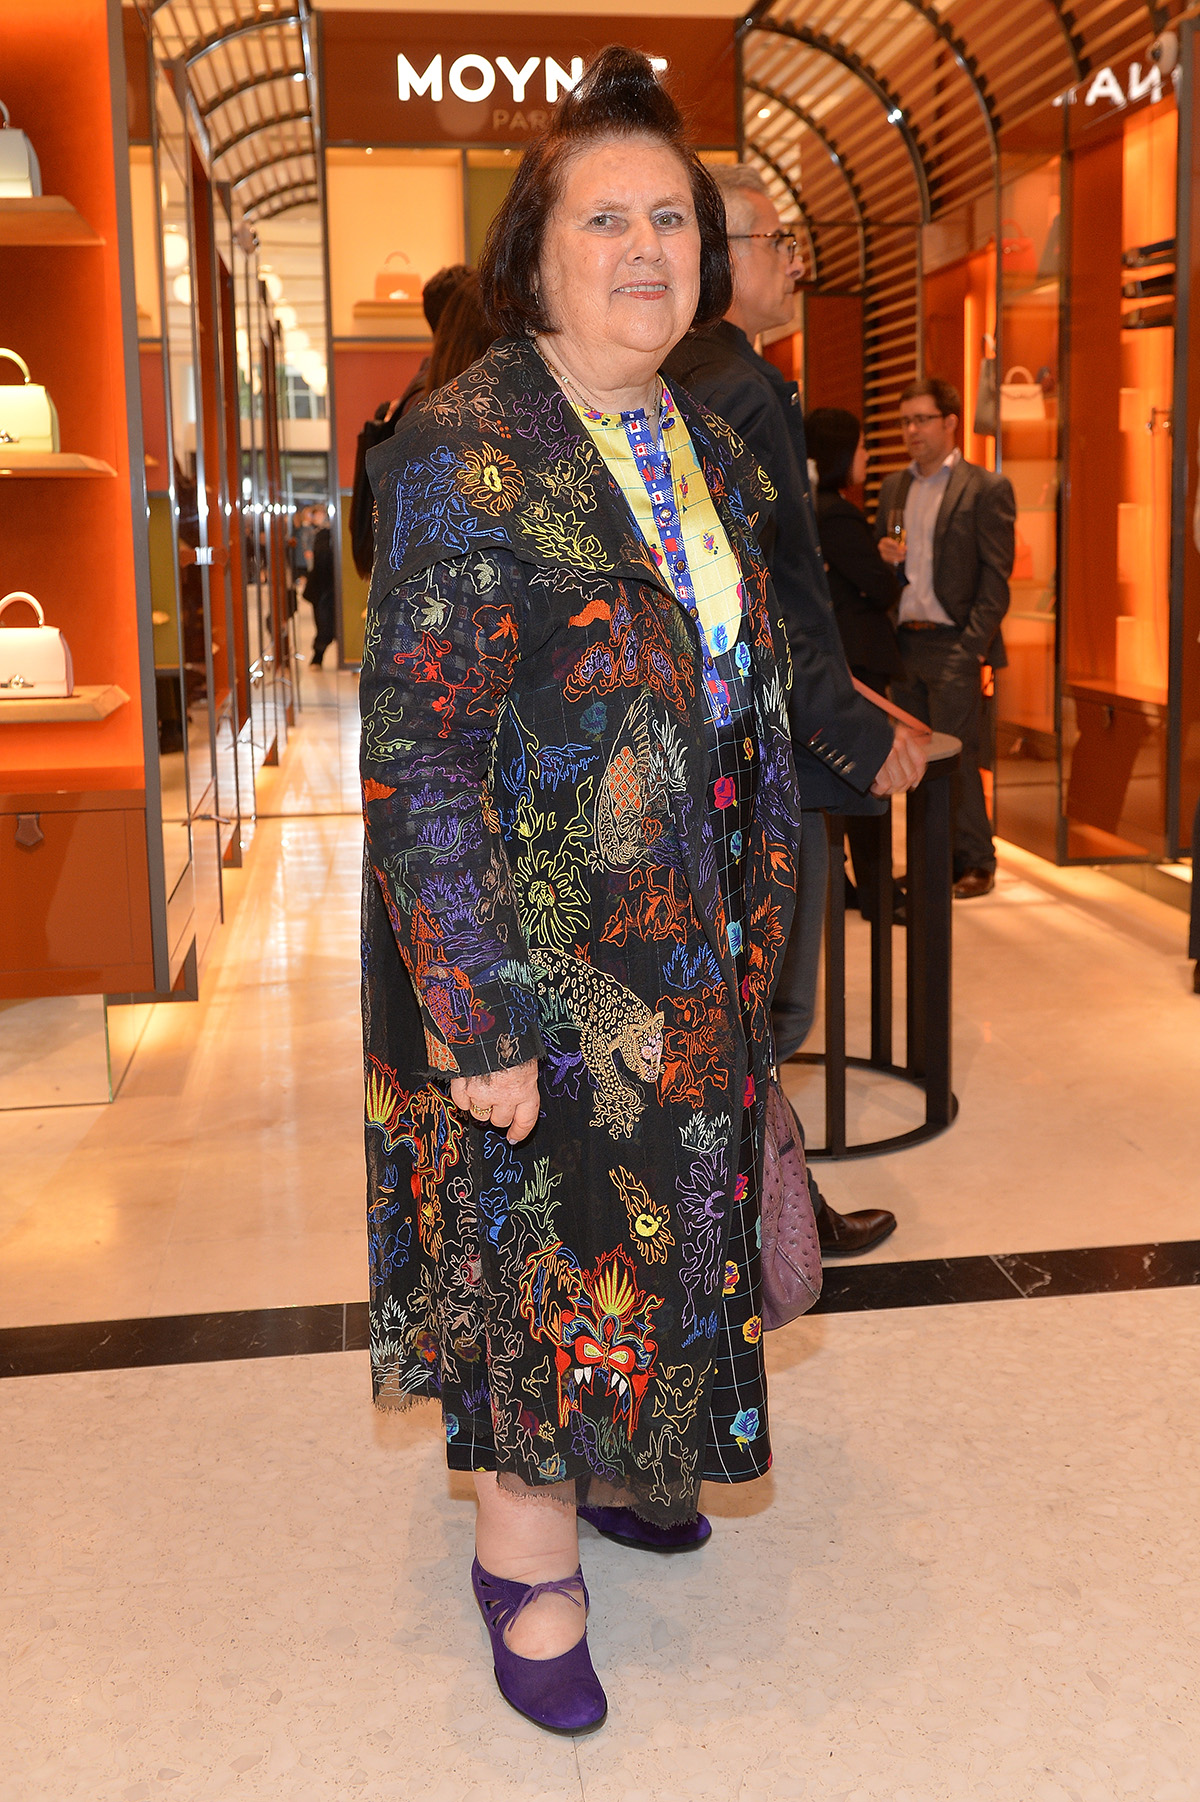 Suzy Menkes Vogue Editor in wearing floral dress and heels